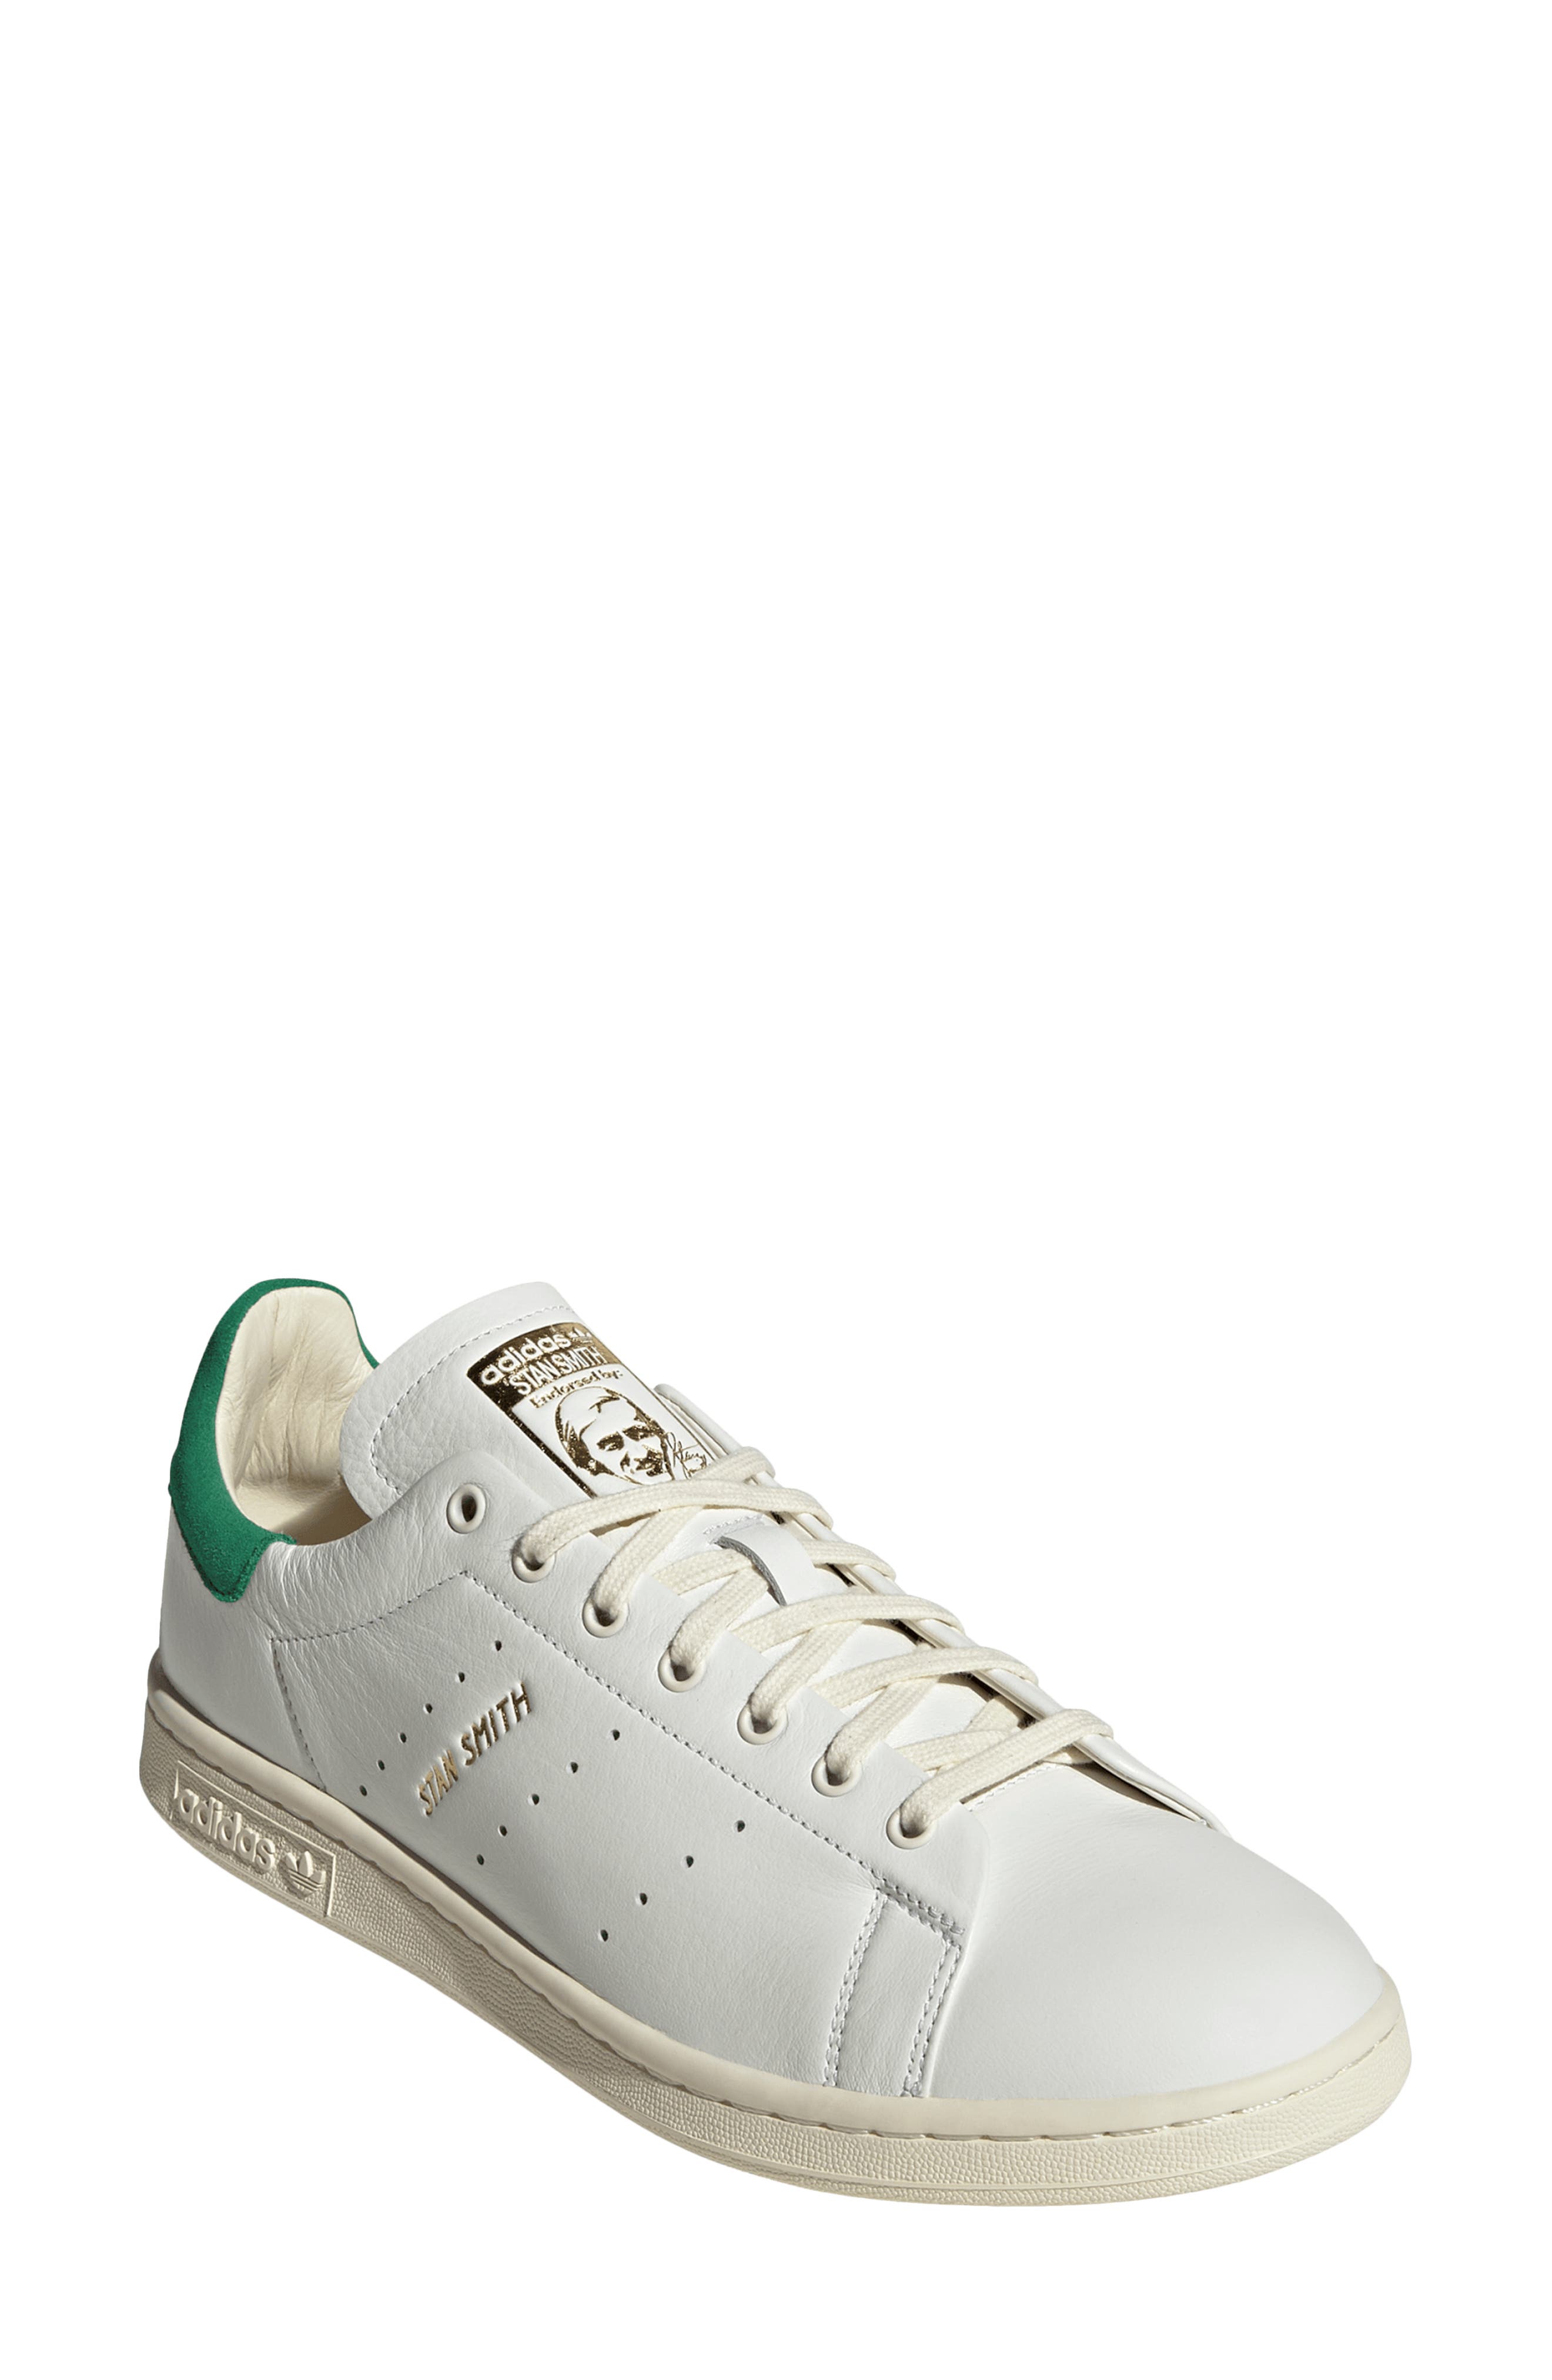 classic stan smith sneakers